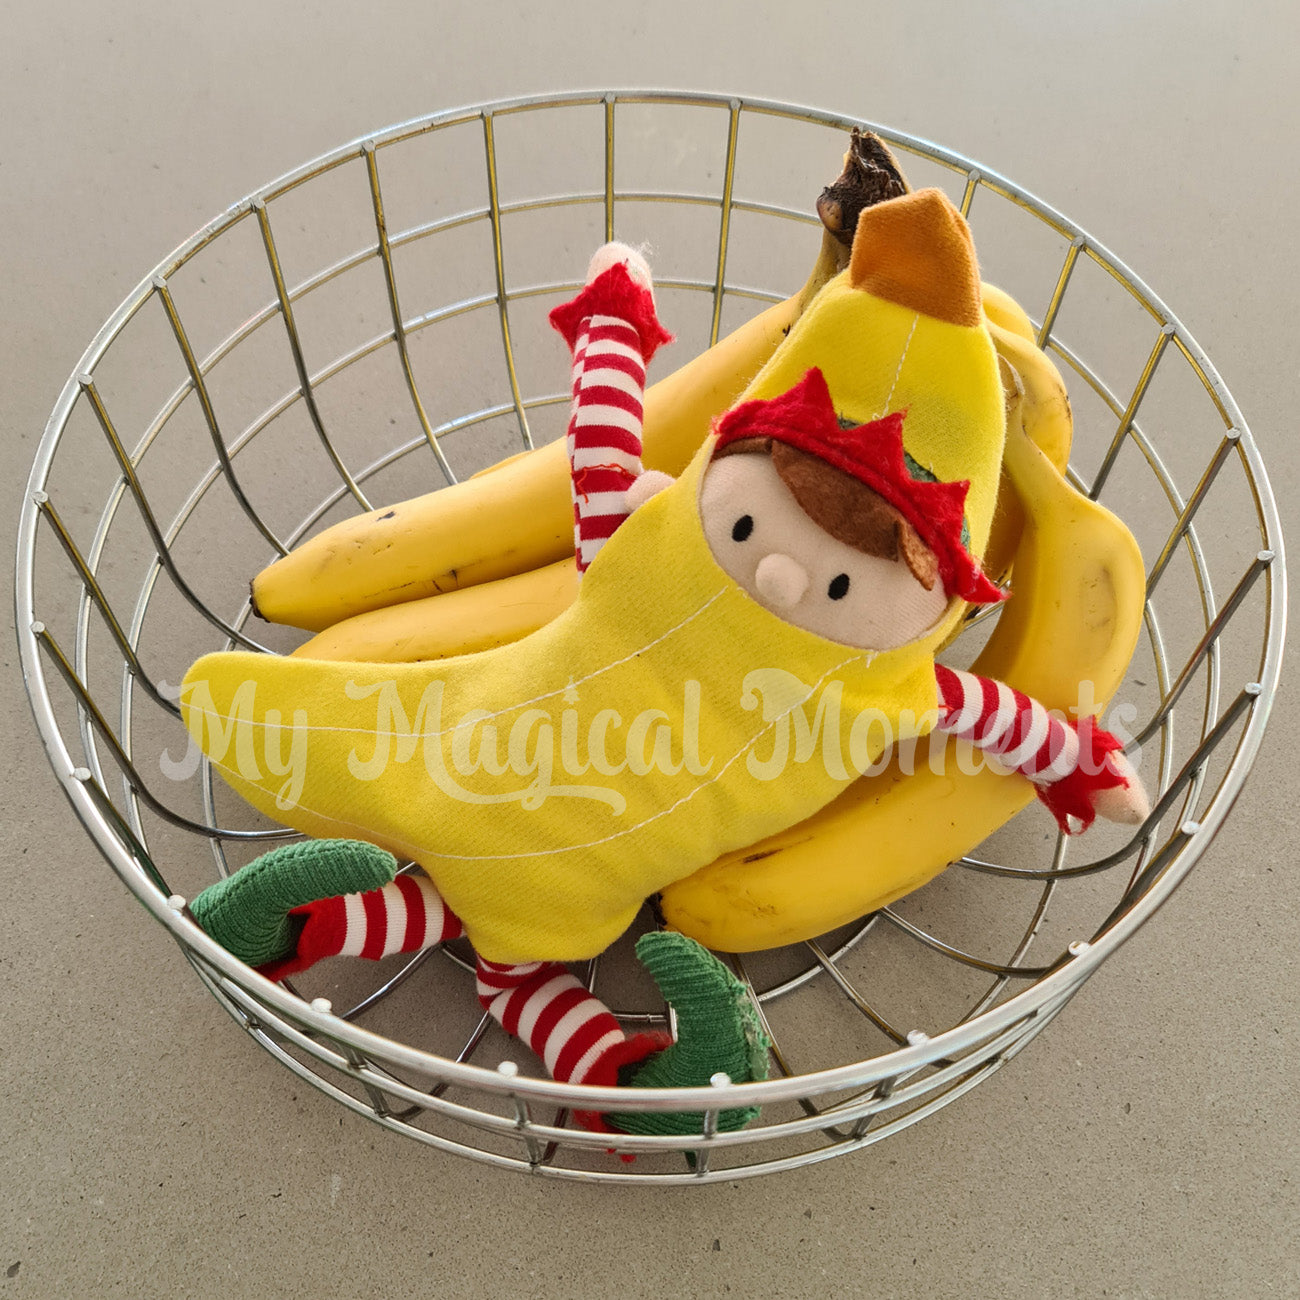 an elf for christmas dressed as a banana costume hiding in bananas